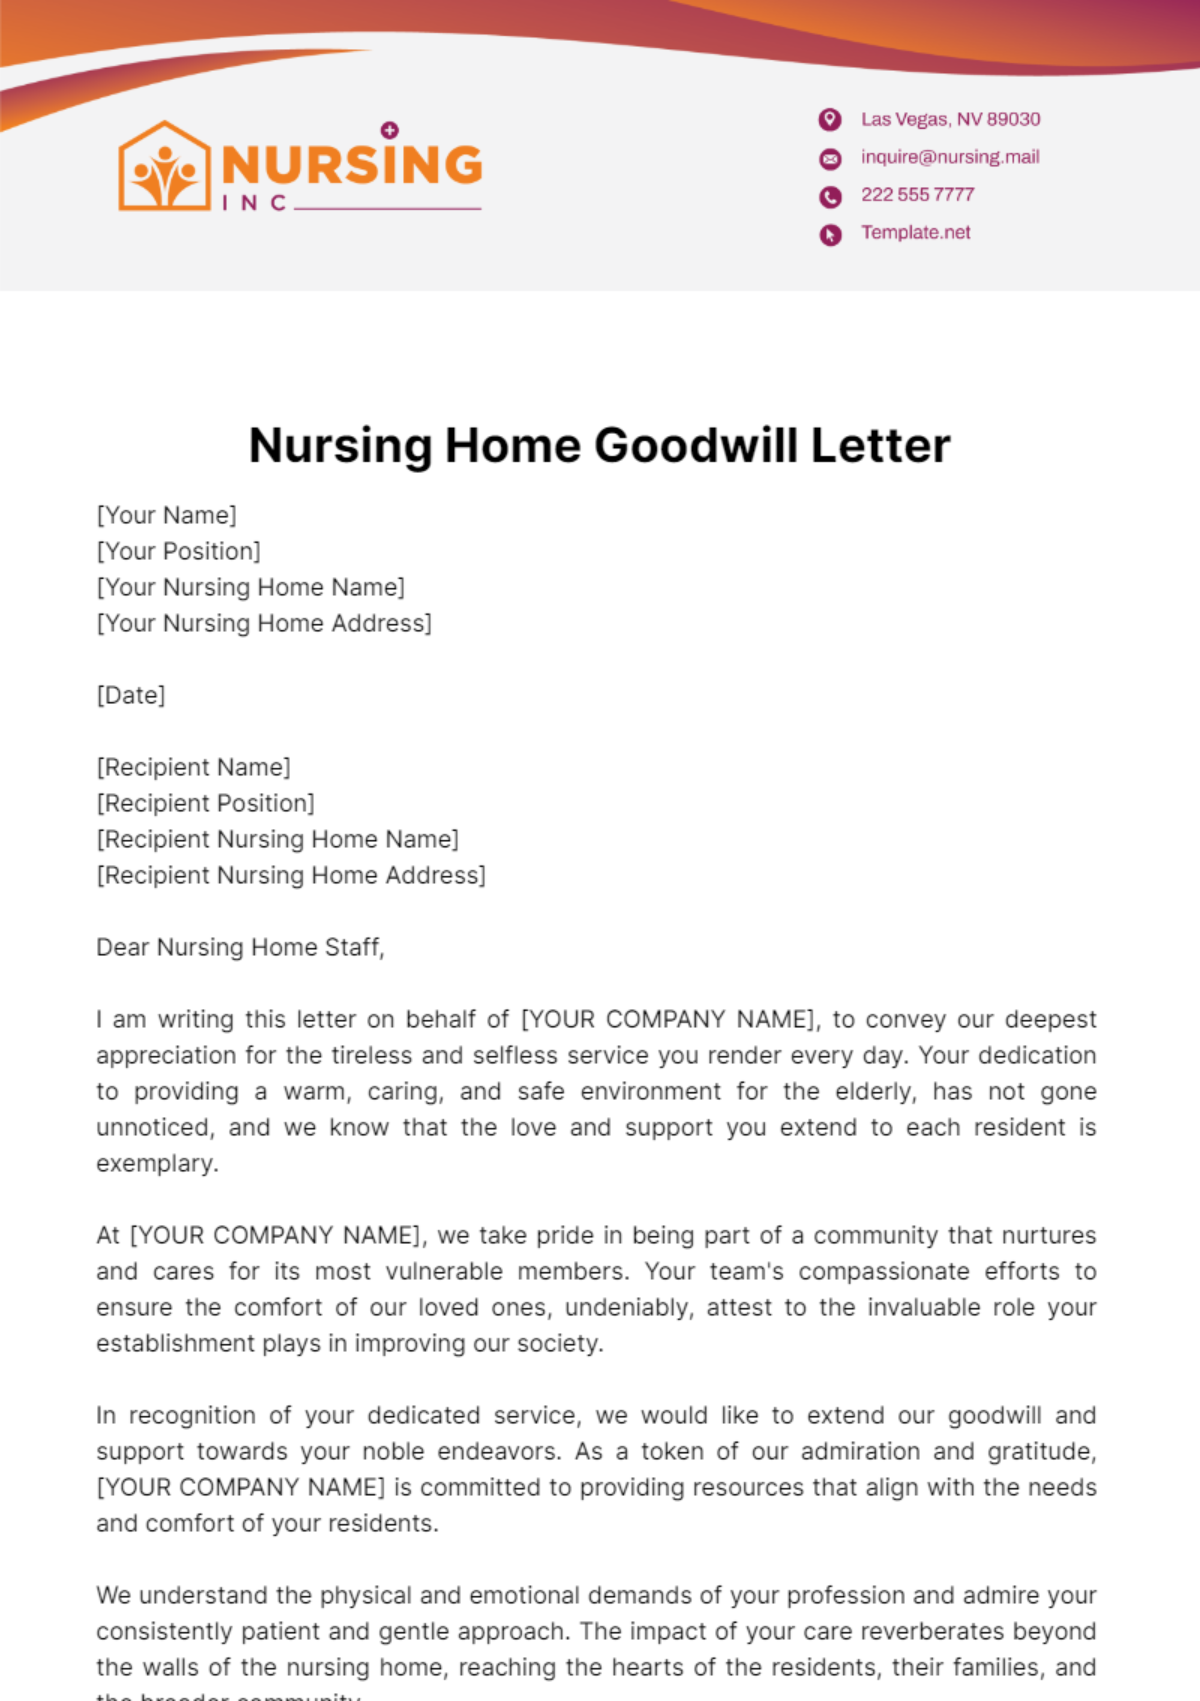 Free Nursing Home Goodwill Letter Template